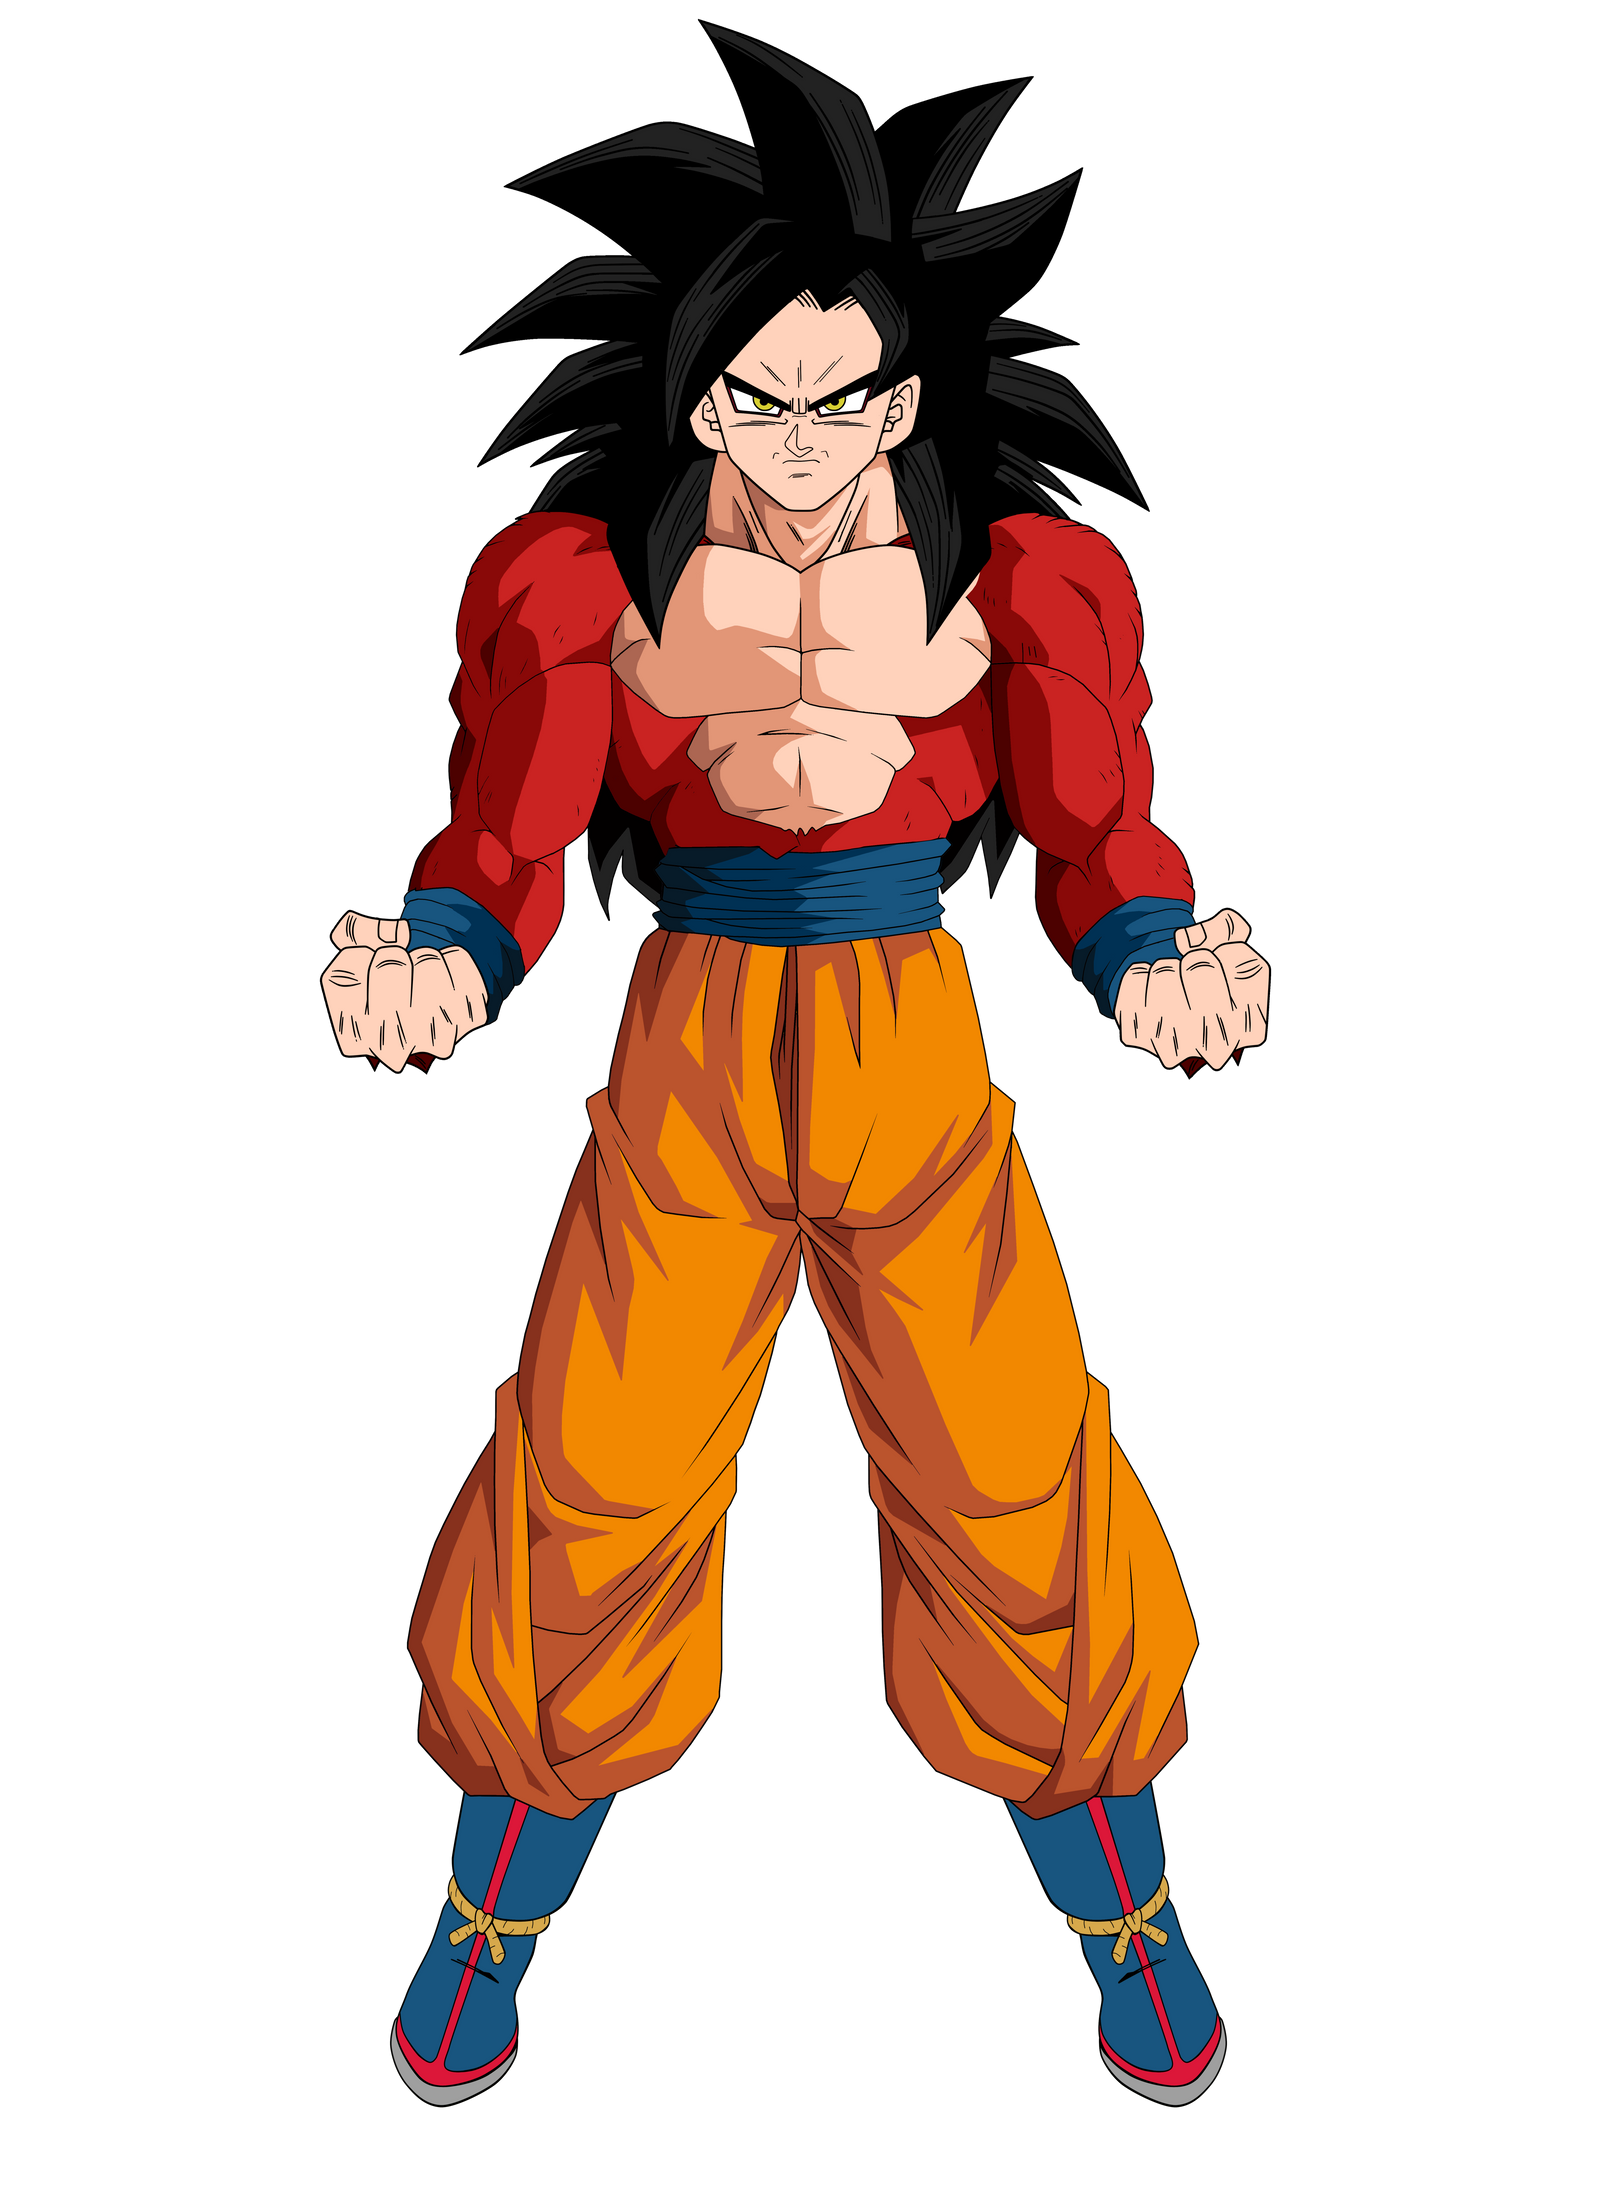 Ss4 Goku Dbs Colors Wip By Obsolete00 On Deviantart